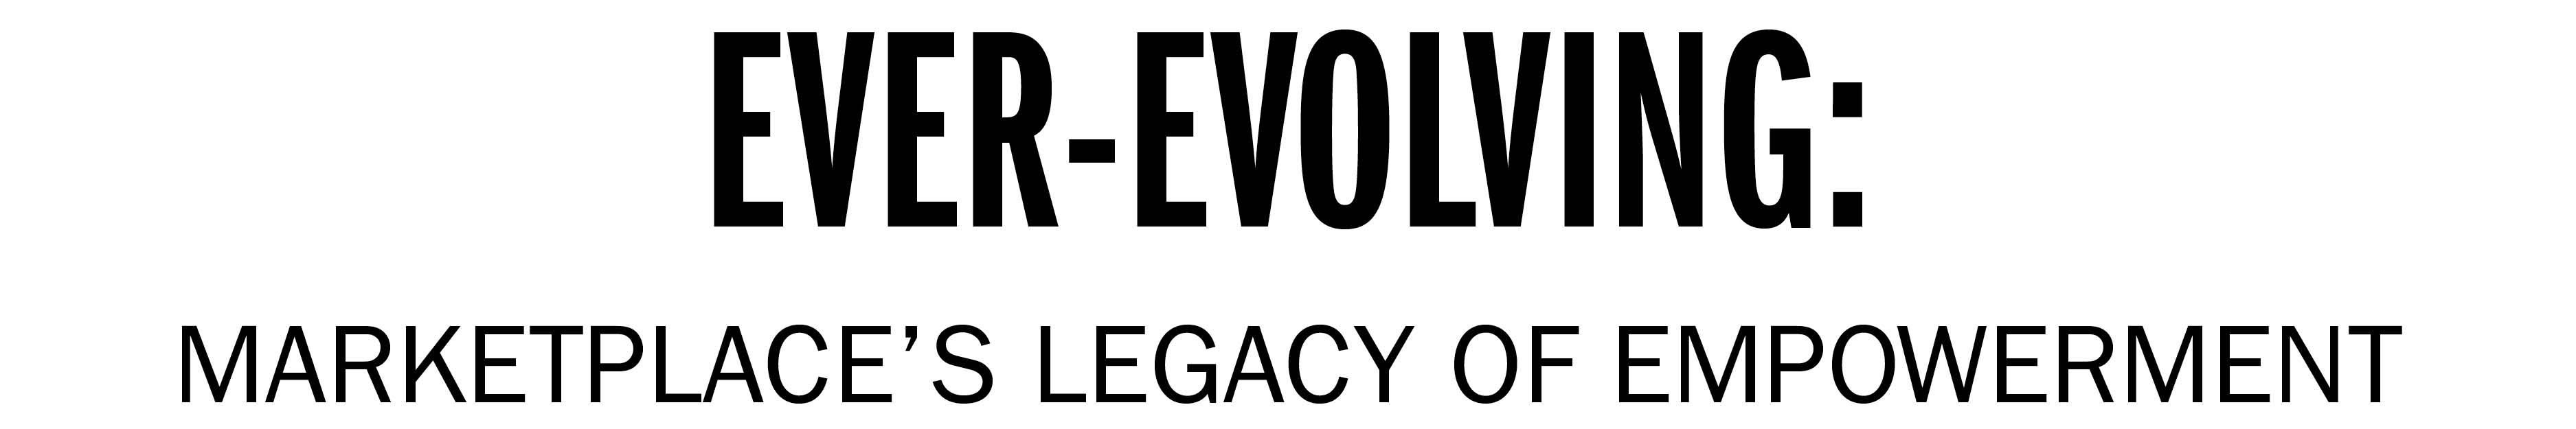 EVER-EVOLVING: MARKETPLACE'S LEGACY OF EMPOWERMENT